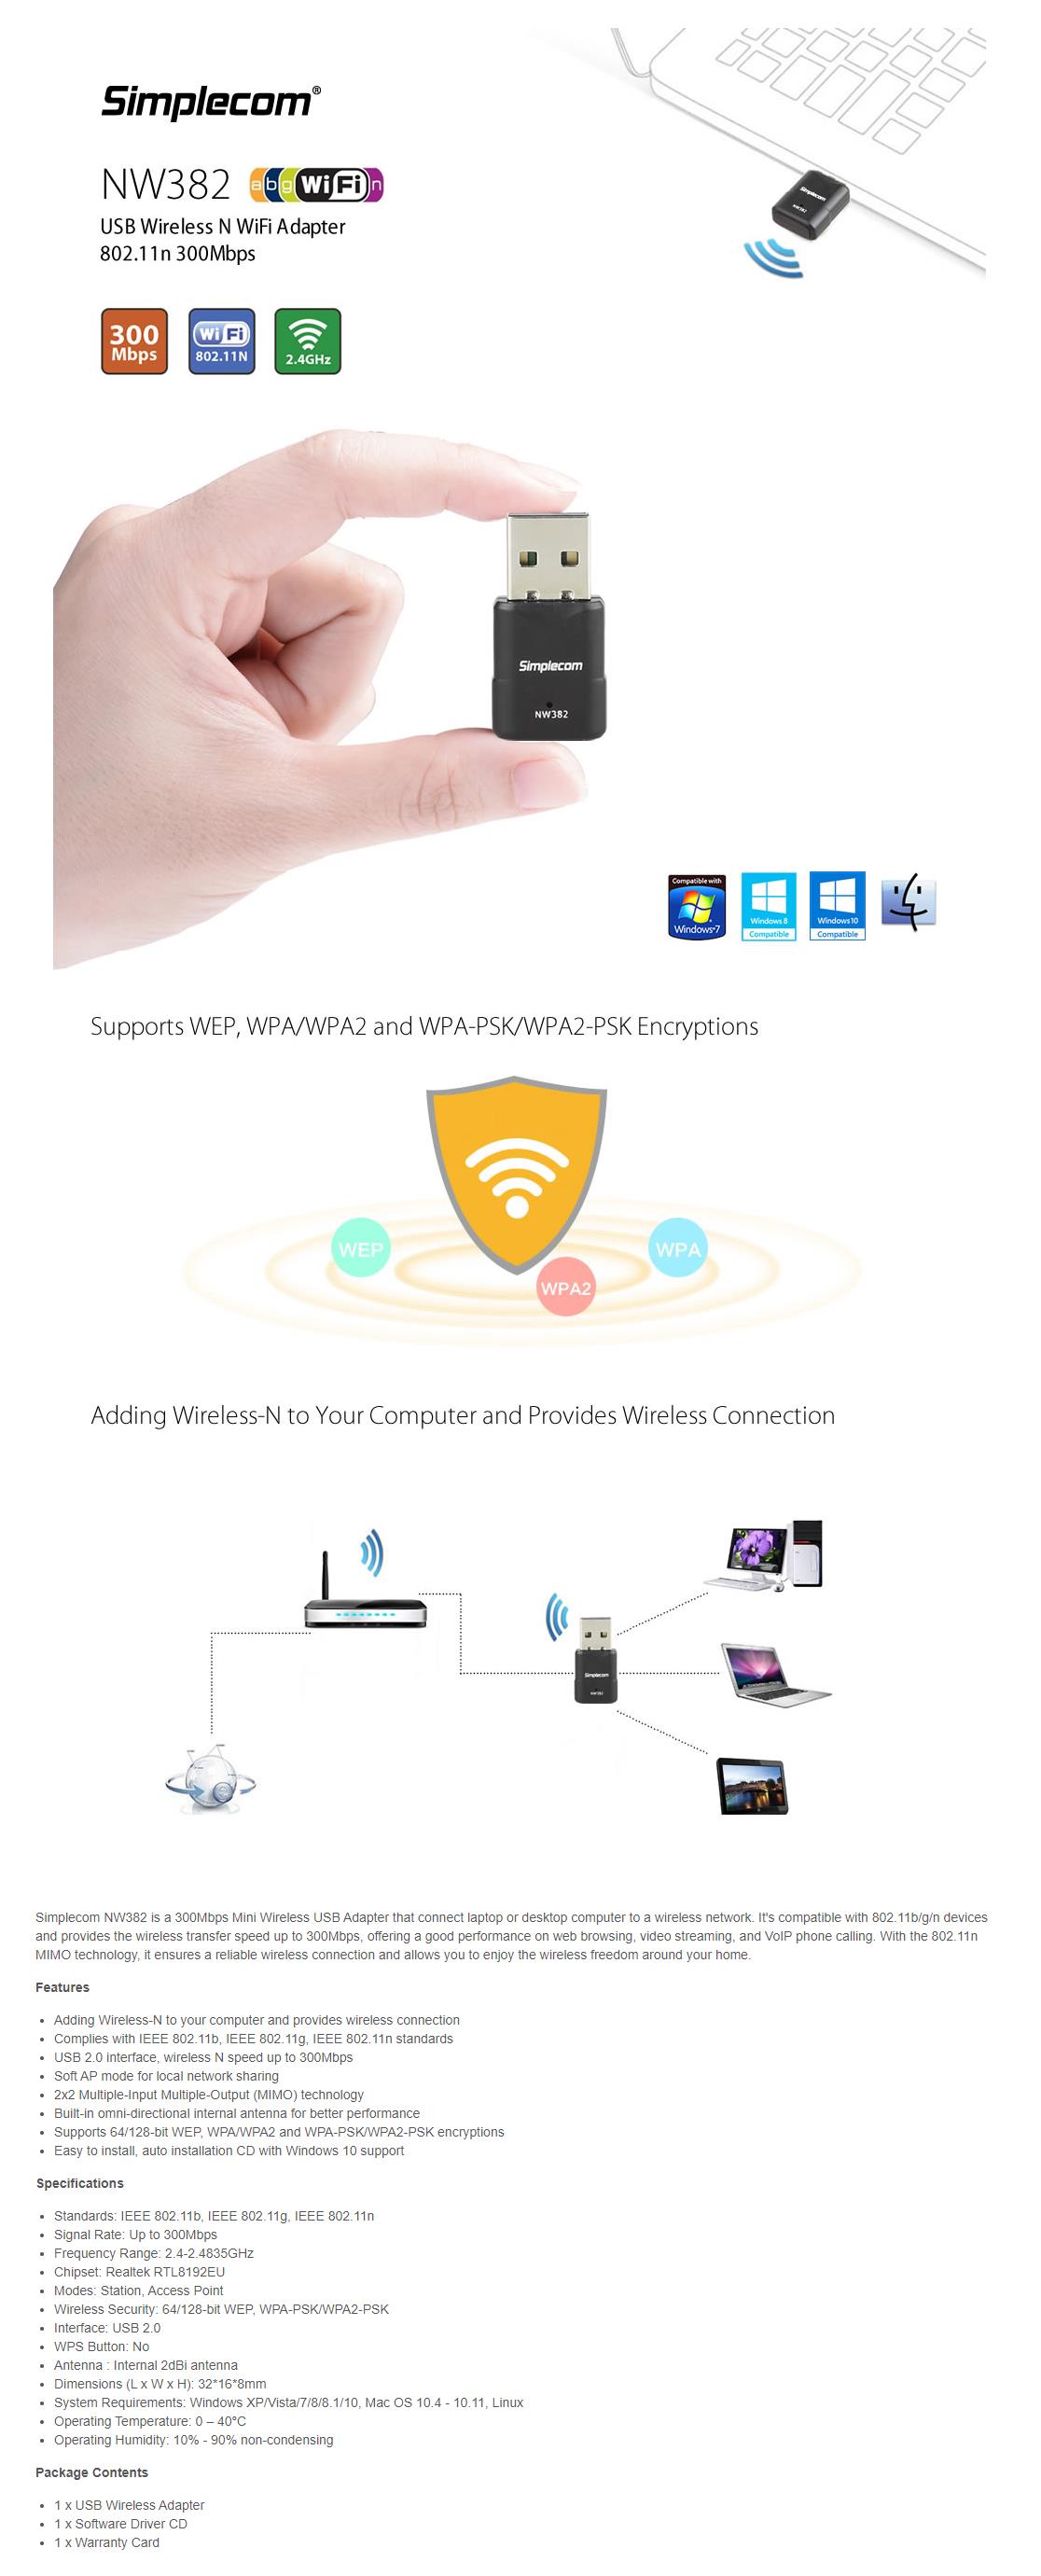 A large marketing image providing additional information about the product Simplecom NW382 Mini Wireless N USB WiFi Adapter - Additional alt info not provided